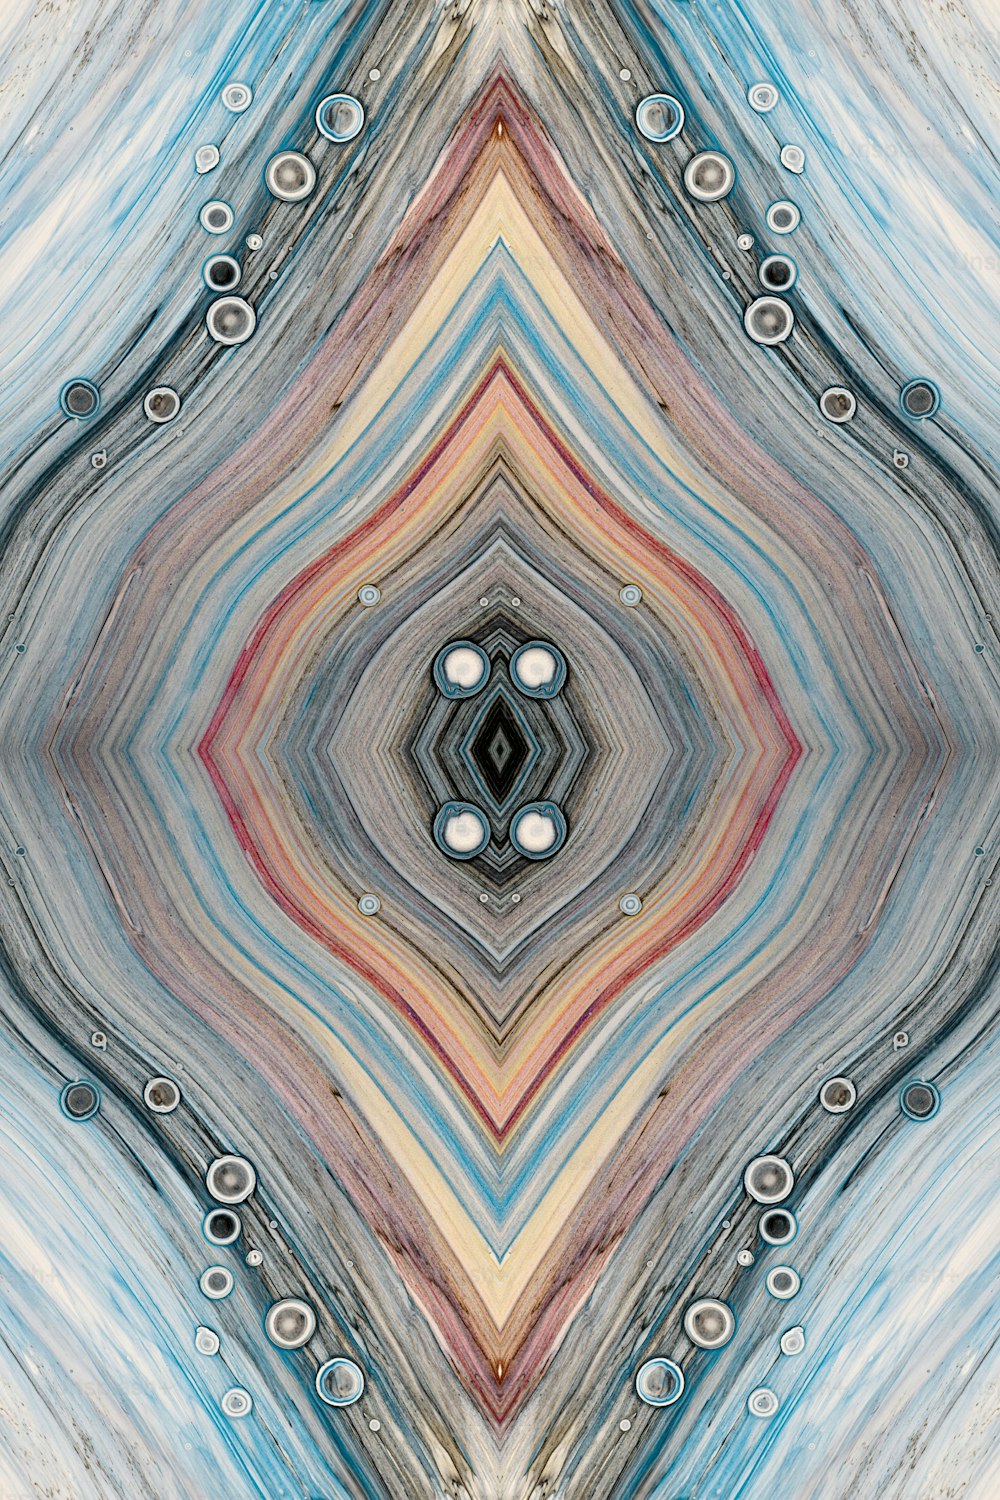 a picture of an abstract design made up of different colors